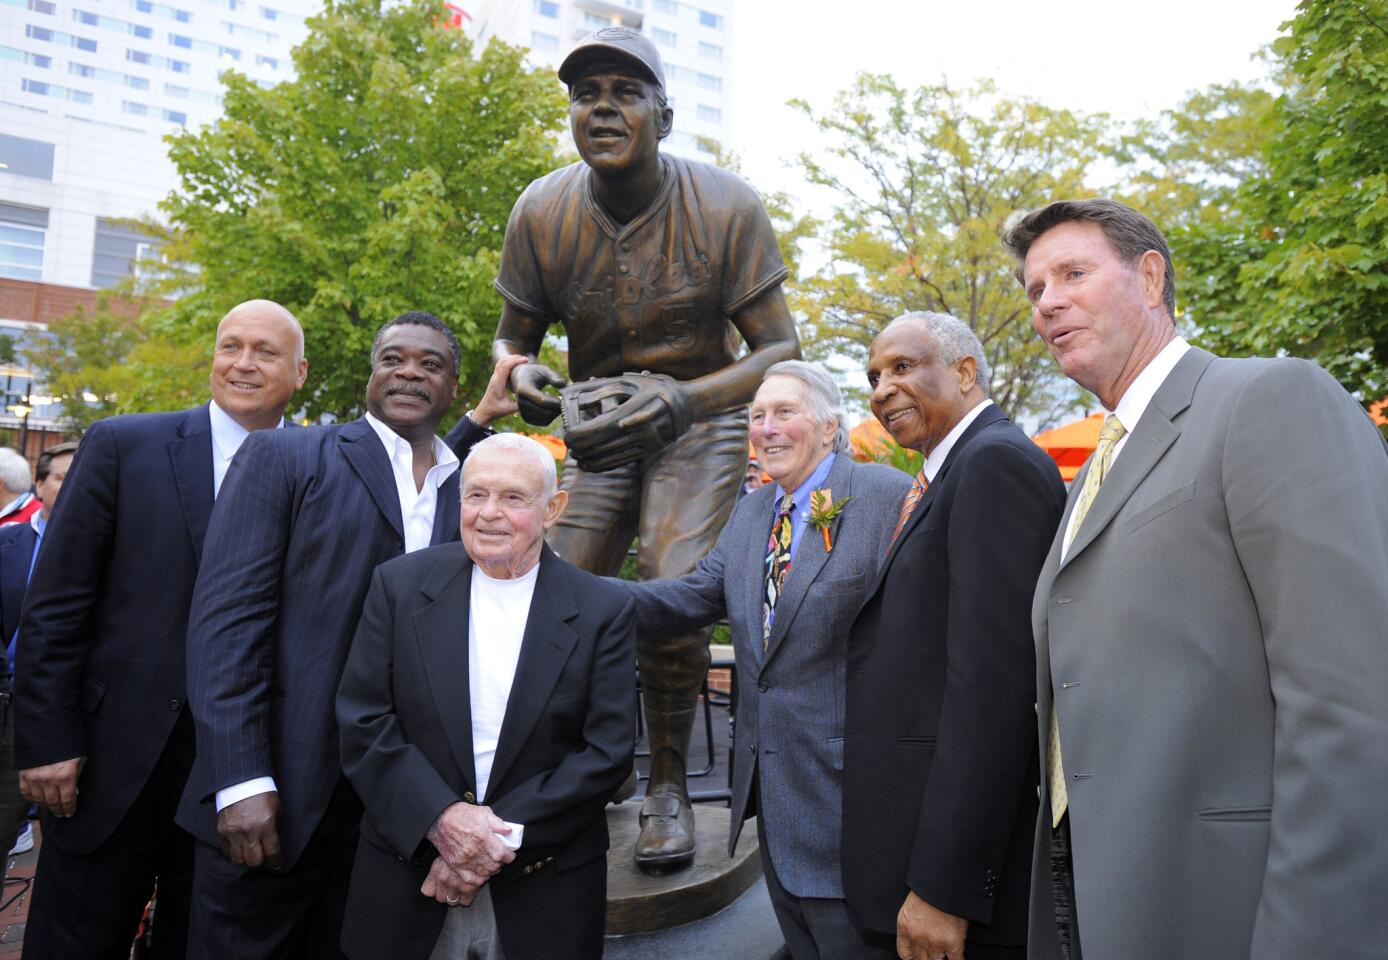 Baltimore Oriole Hall of Famers, from left, Cal Ripken Jr., Eddie Murray, Earl Weaver, Brooks Robinson, Frank Robinson and Jim Palmer pose for a photo as the Orioles unveiled the Brooks Robinson statue at Camden Yards in Baltimore on Sept. 29, 2012.